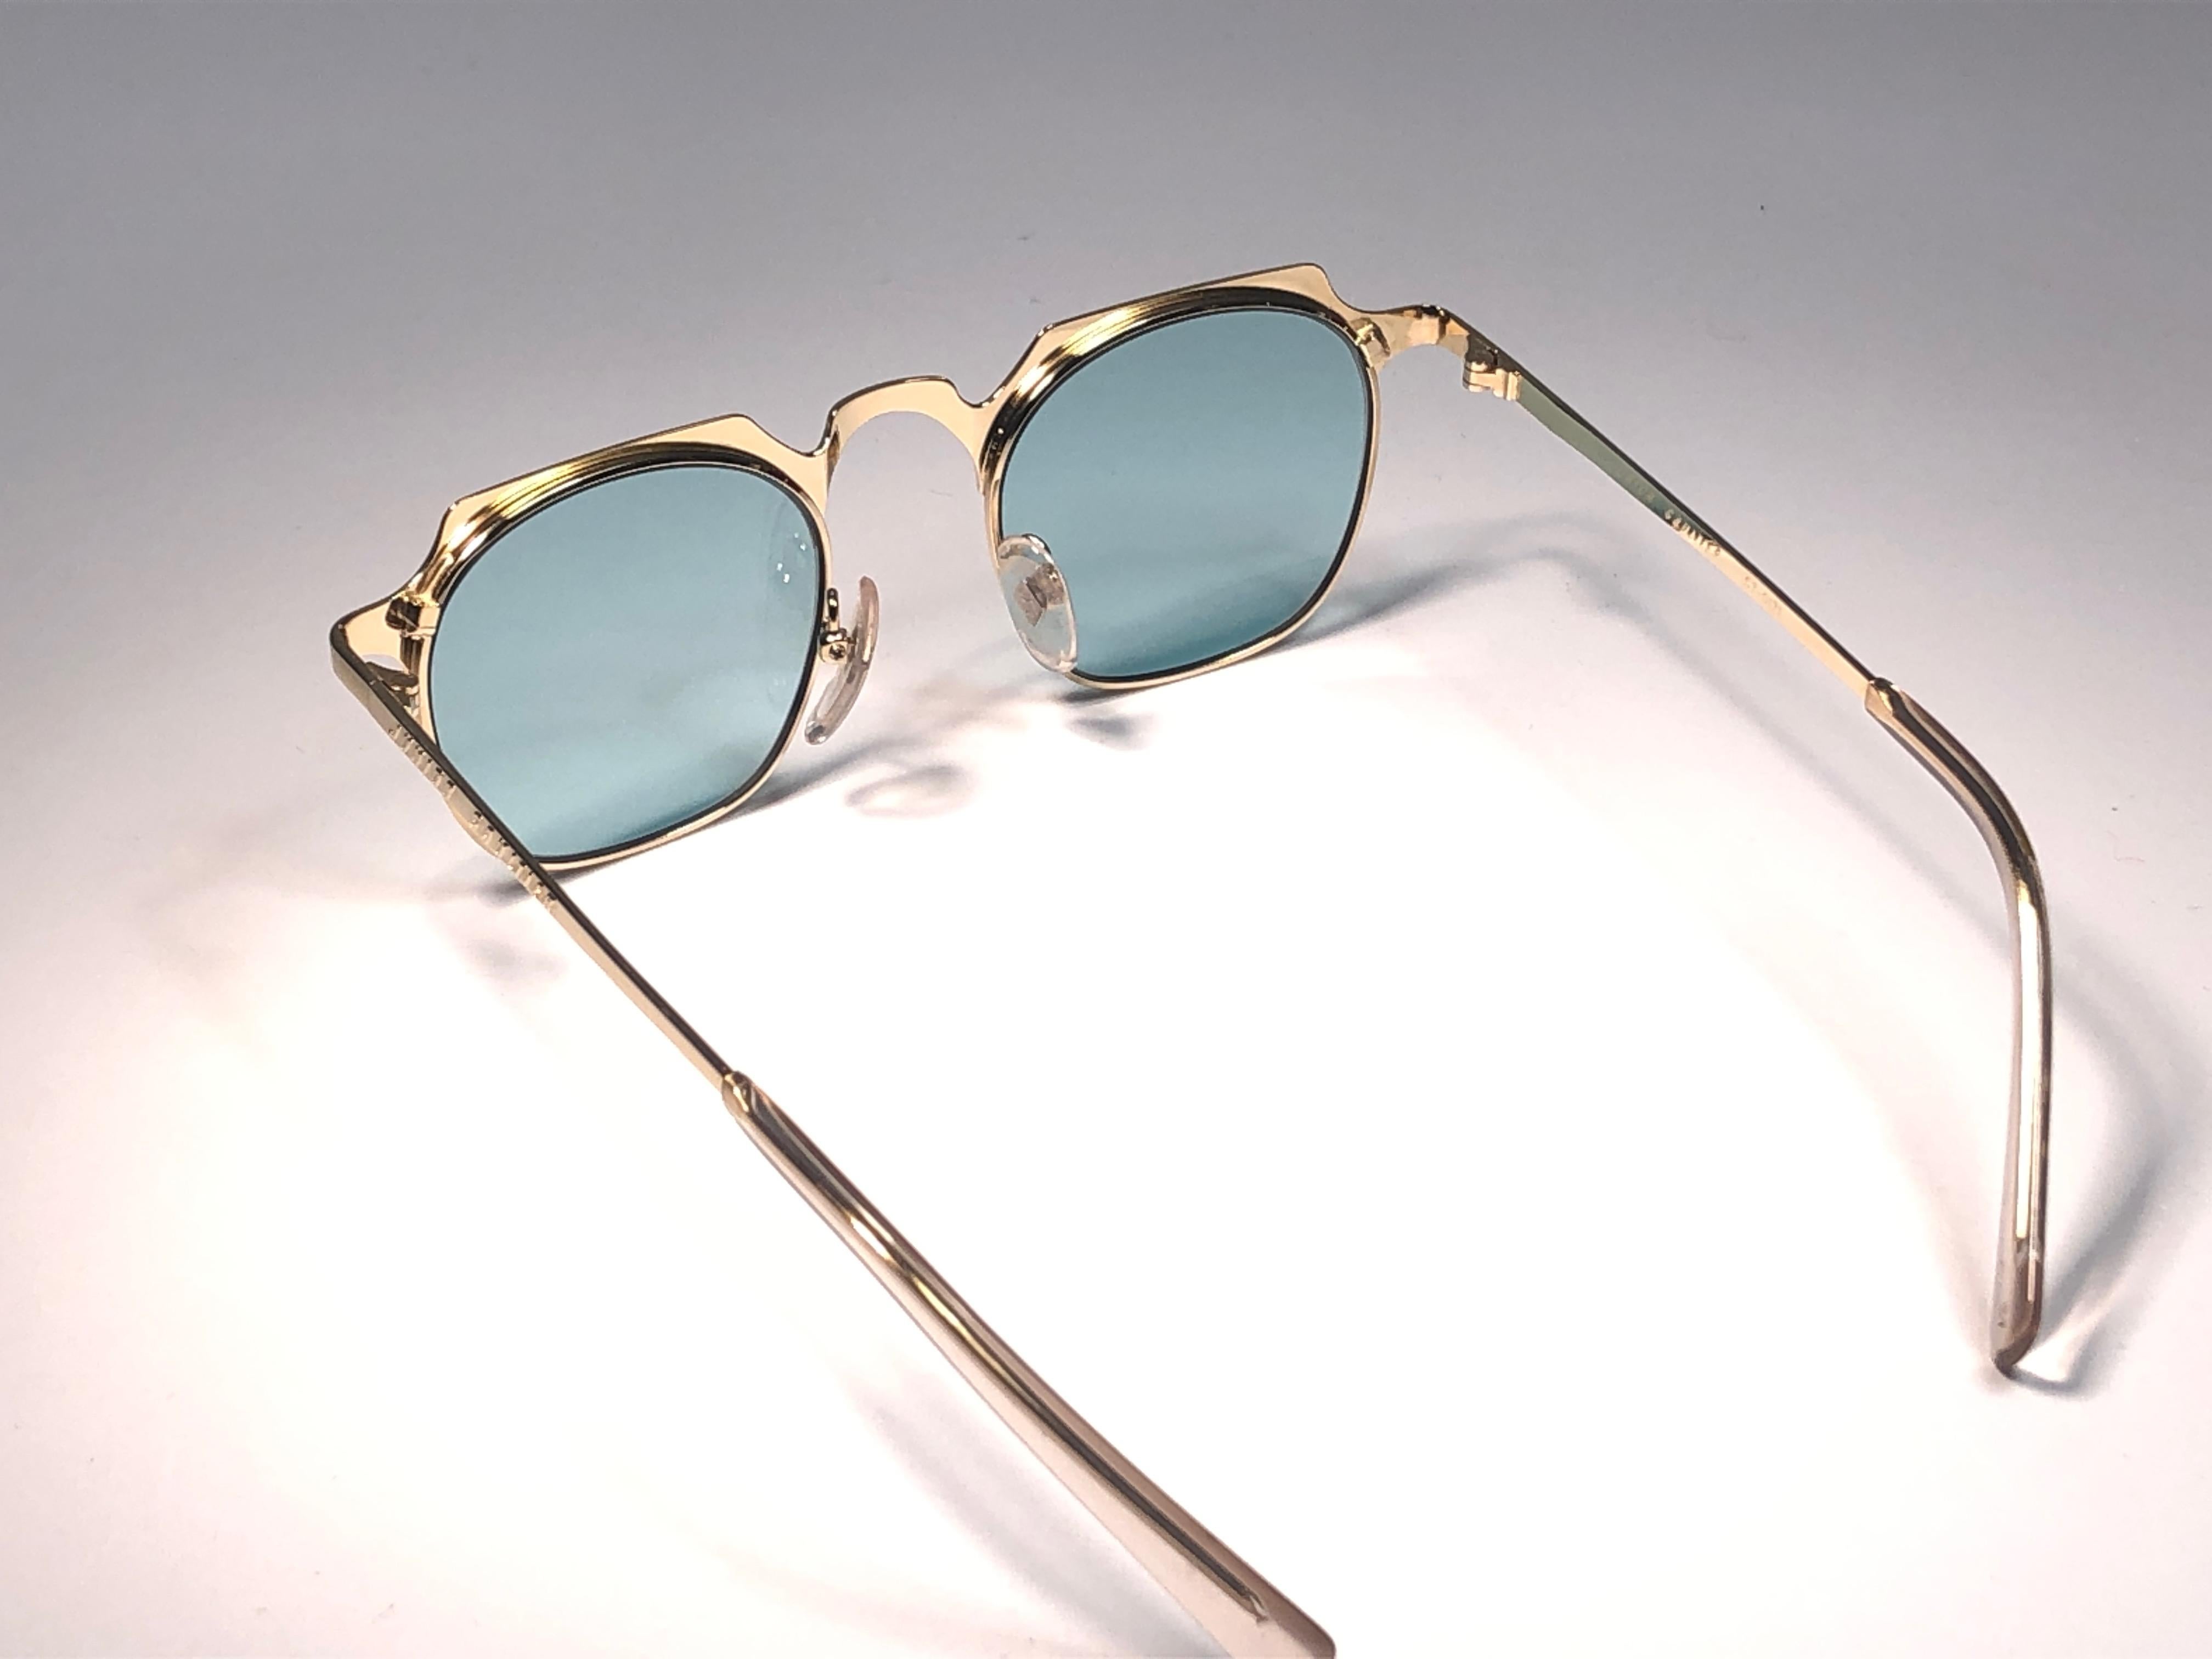 New Jean Paul Gaultier 57 0171 Oval Gold Sunglasses 1990's Made in Japan  5